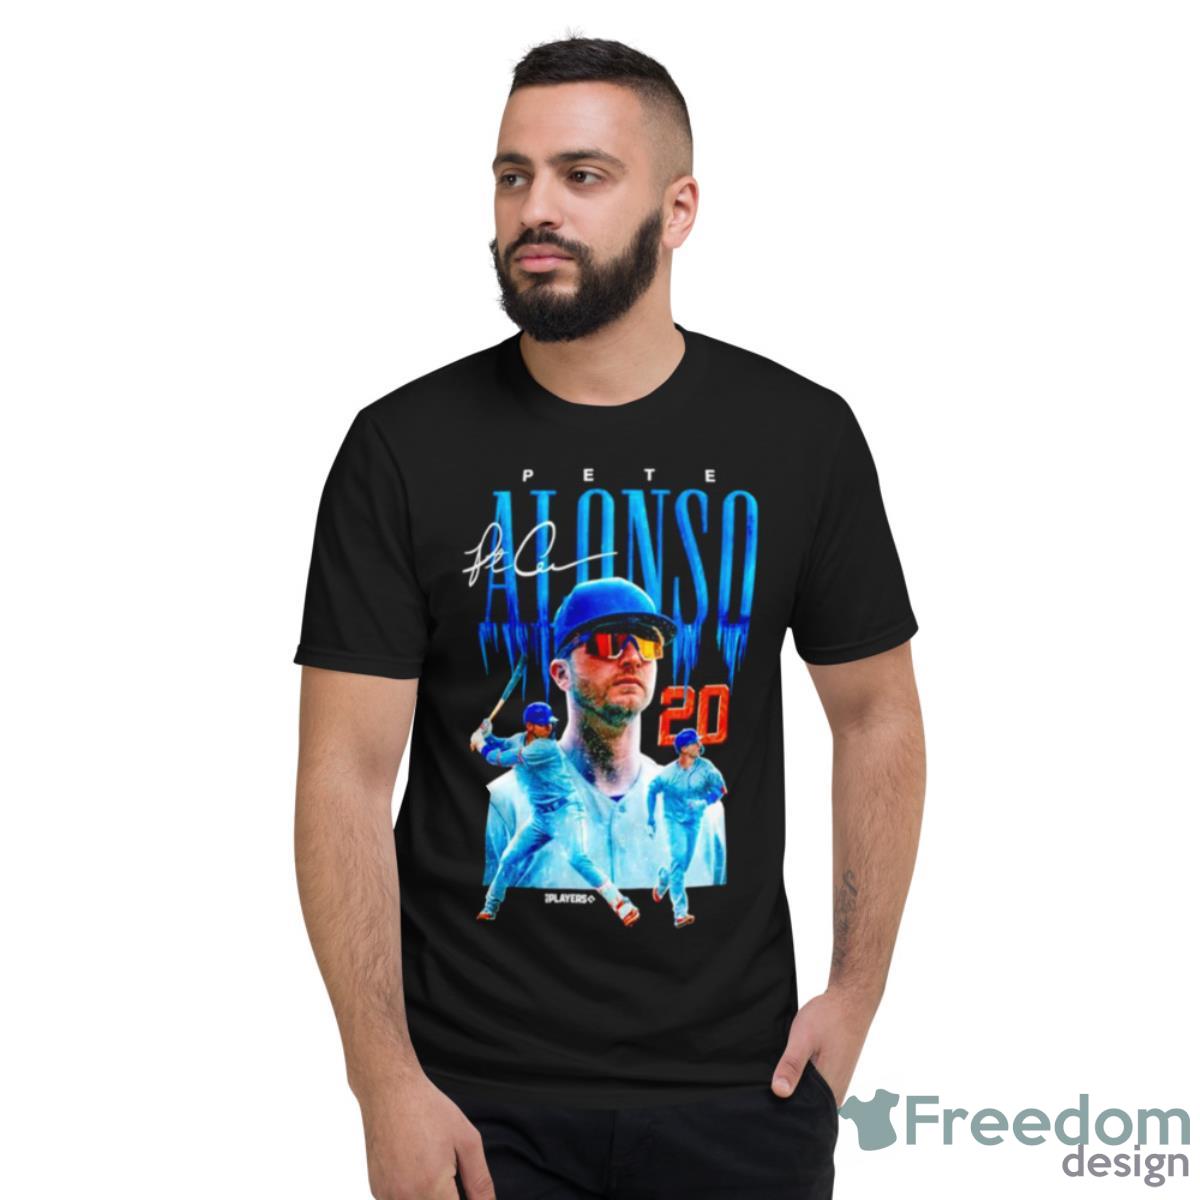 Youth Pete Alonso Royal New York Mets Player Jersey